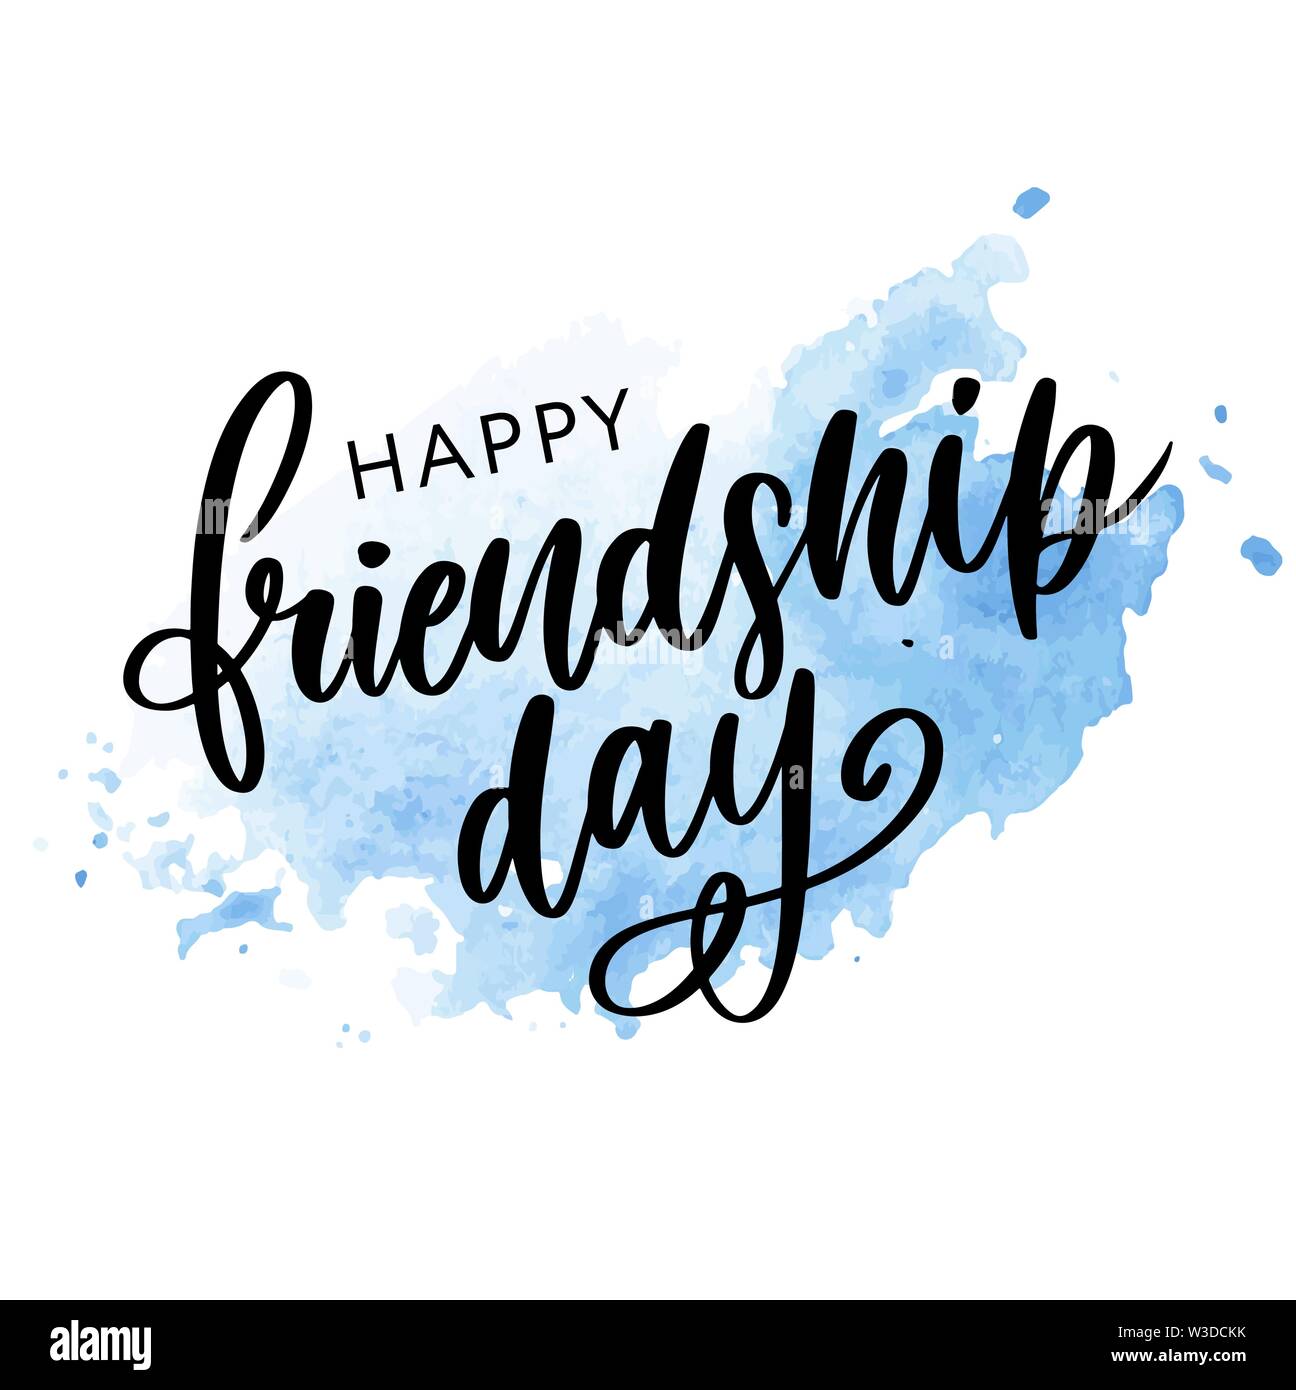 Vector illustration of hand drawn happy friendship day felicitation in fashion style with lettering text sign and color triangle Stock Vector